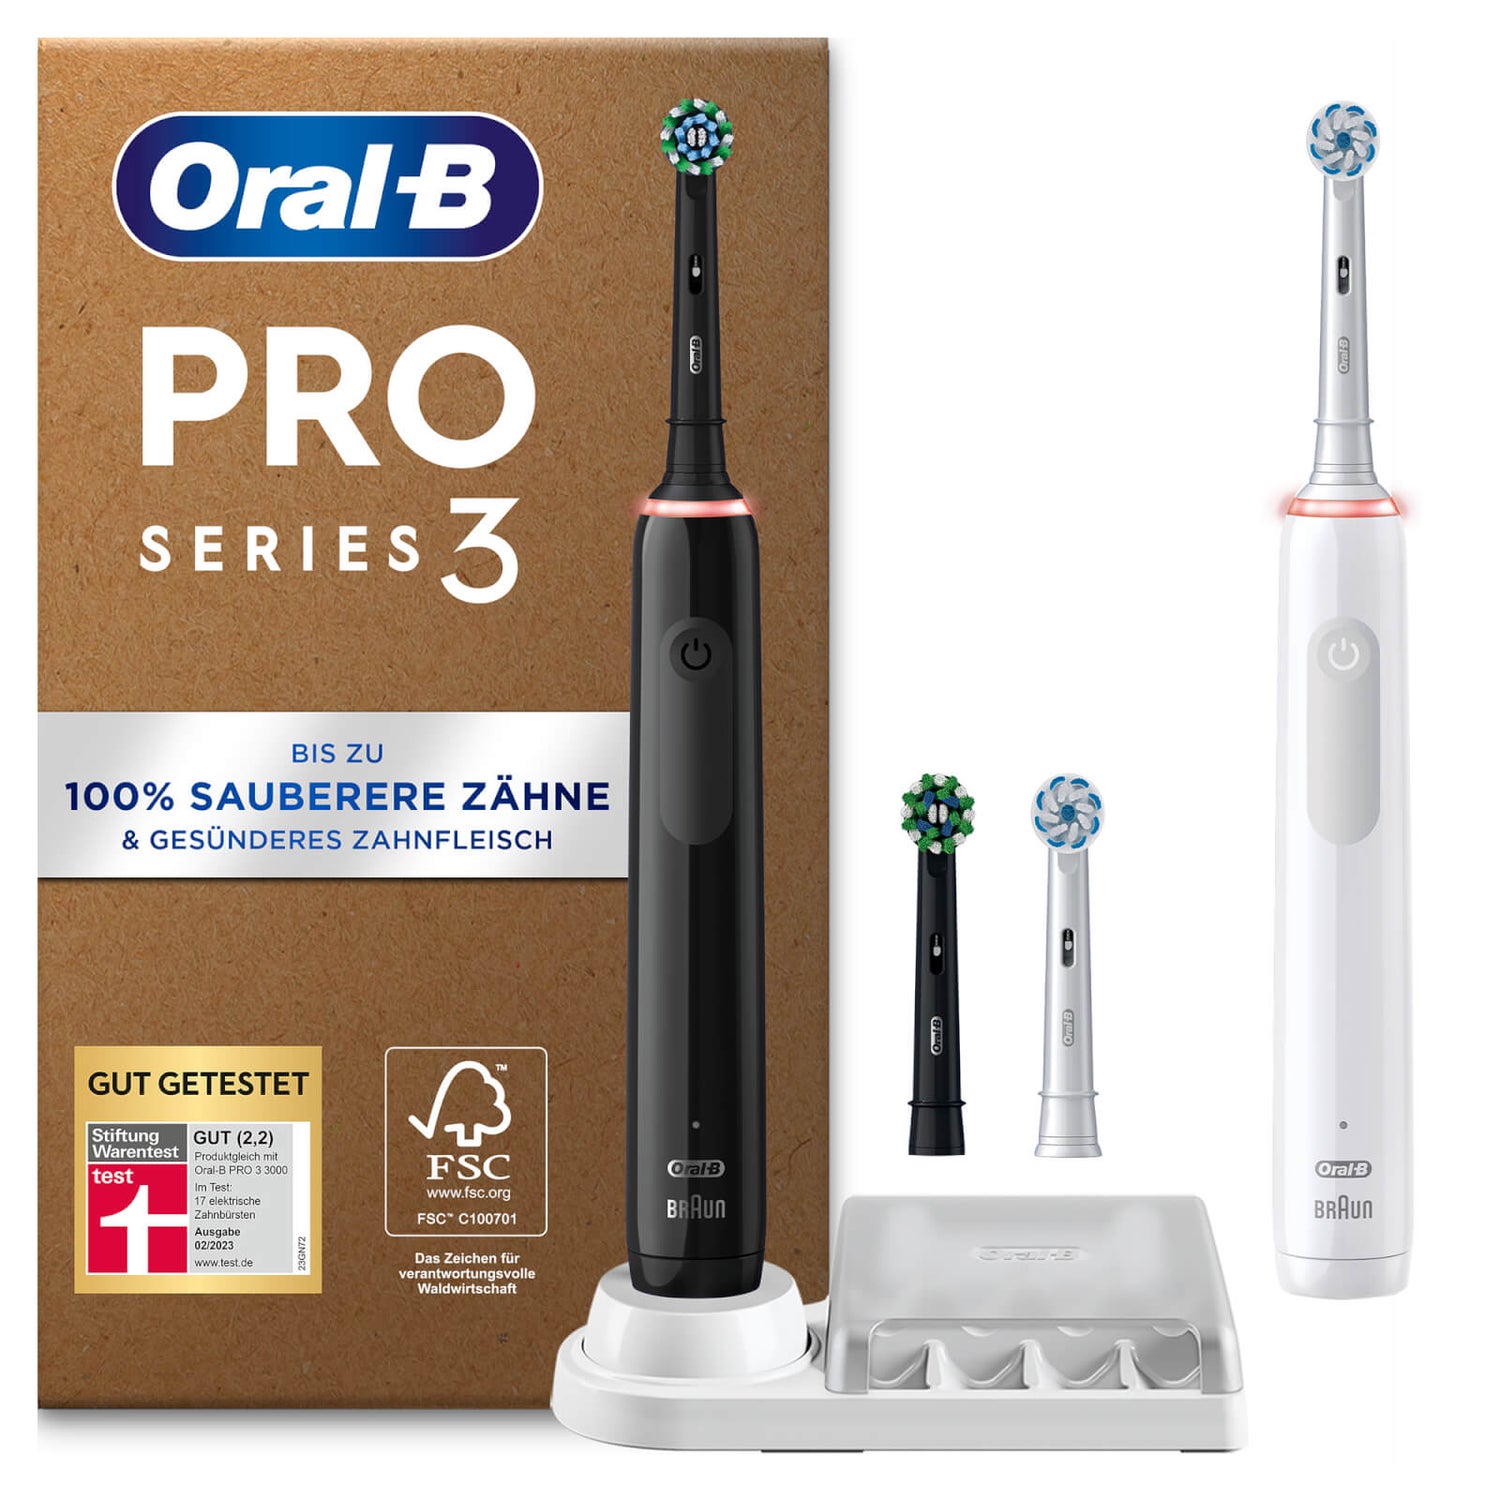 Oral-B Pro Series 3 Plus Edition Duo Electric Toothbrush